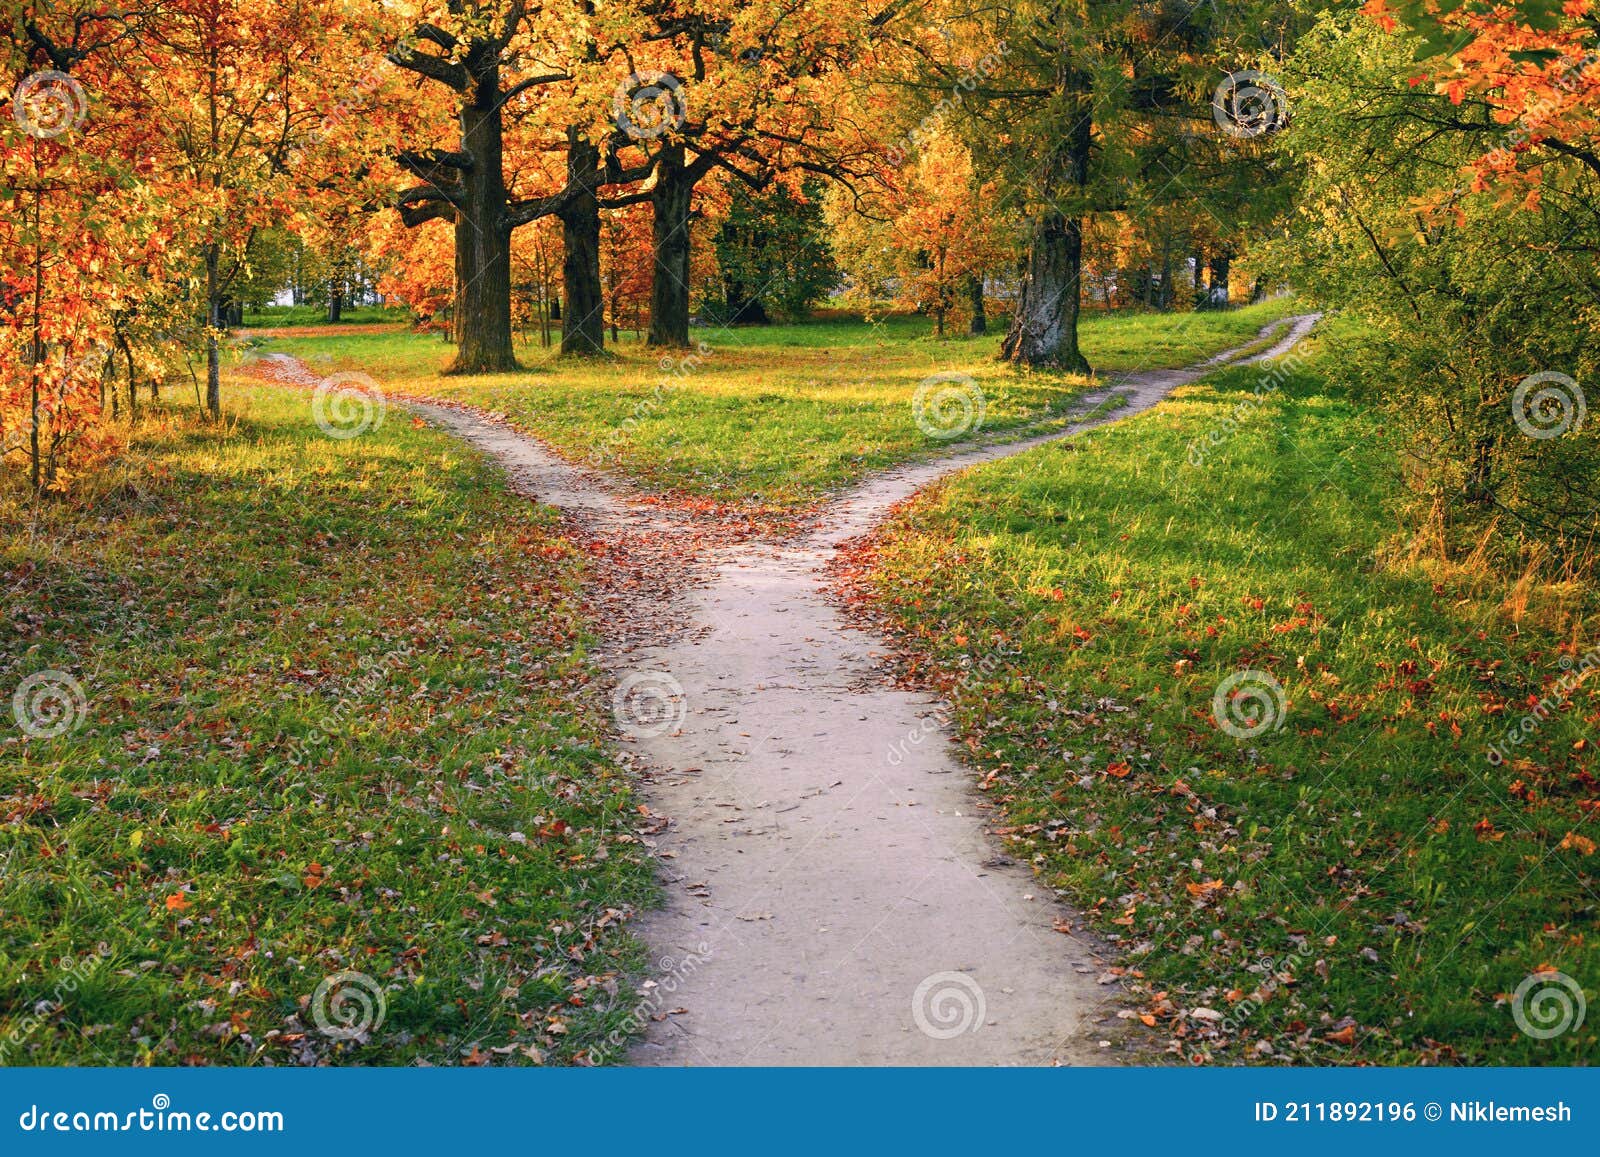 a wide trail strewn with fallen autumn foliage is divided into two paths that diverge in different directions. autumn landscape